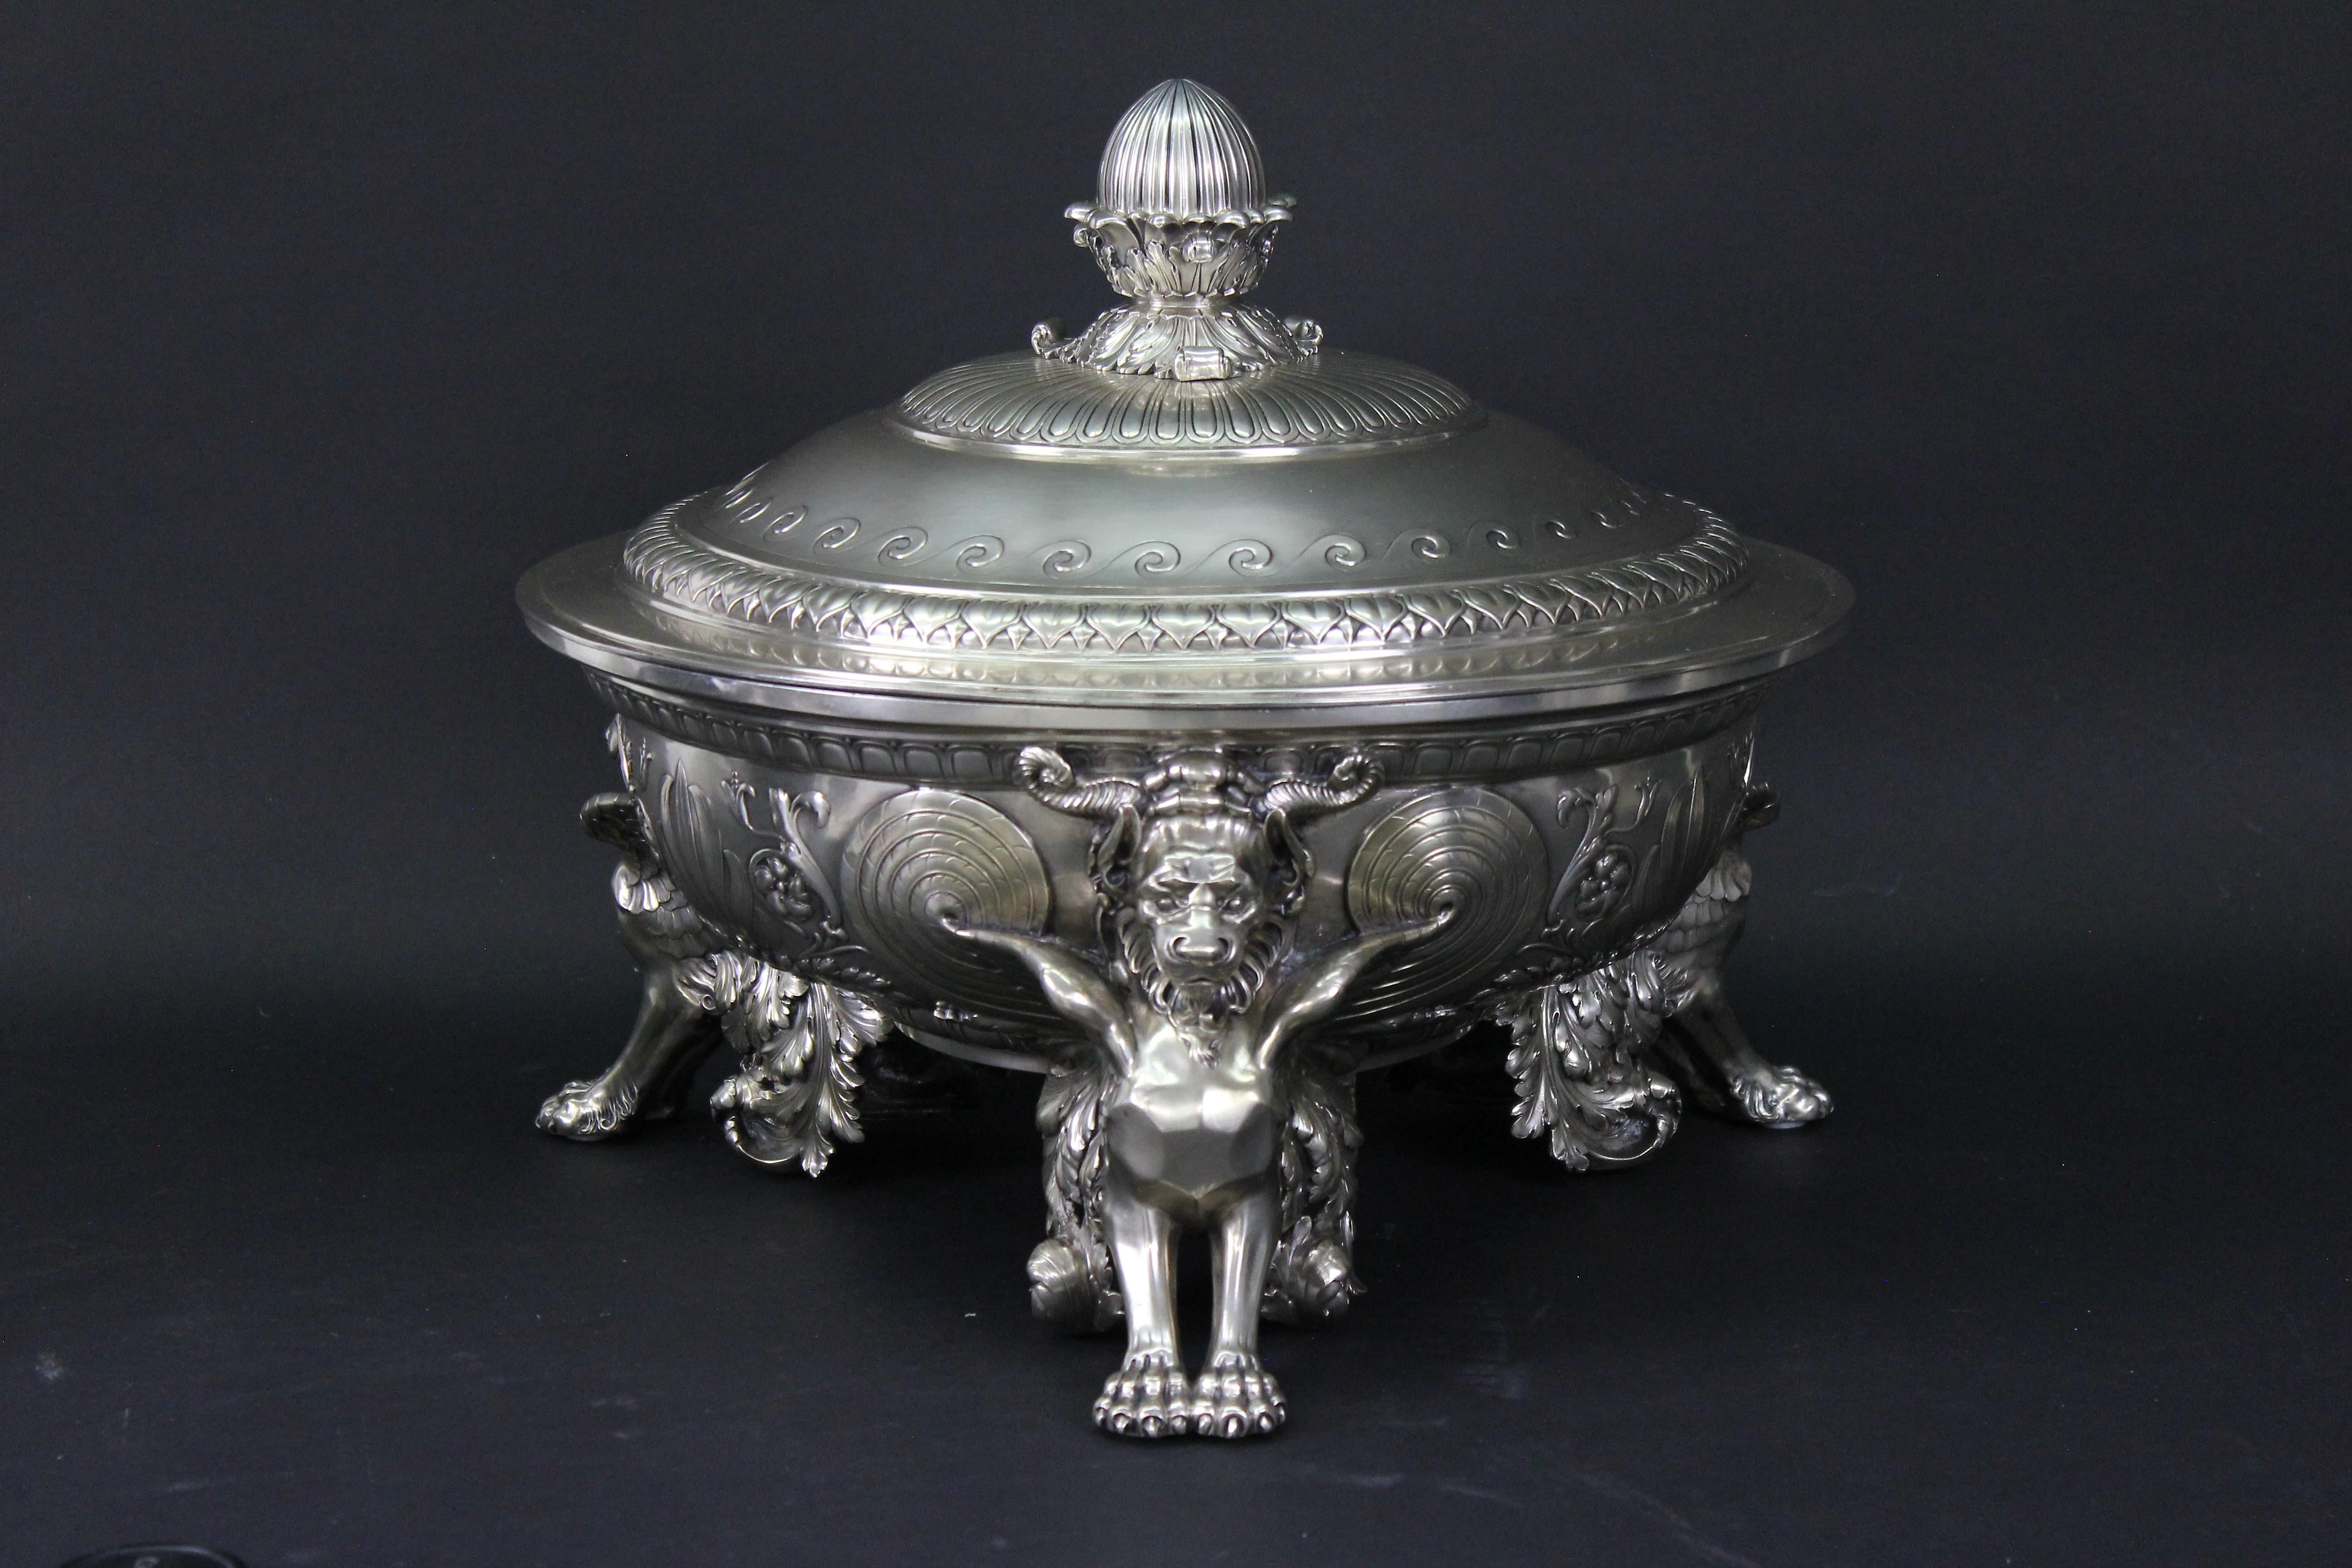 Monumental Antique Silver Tureen by Wilkens & Söhne 1905, Bremen Germany 9